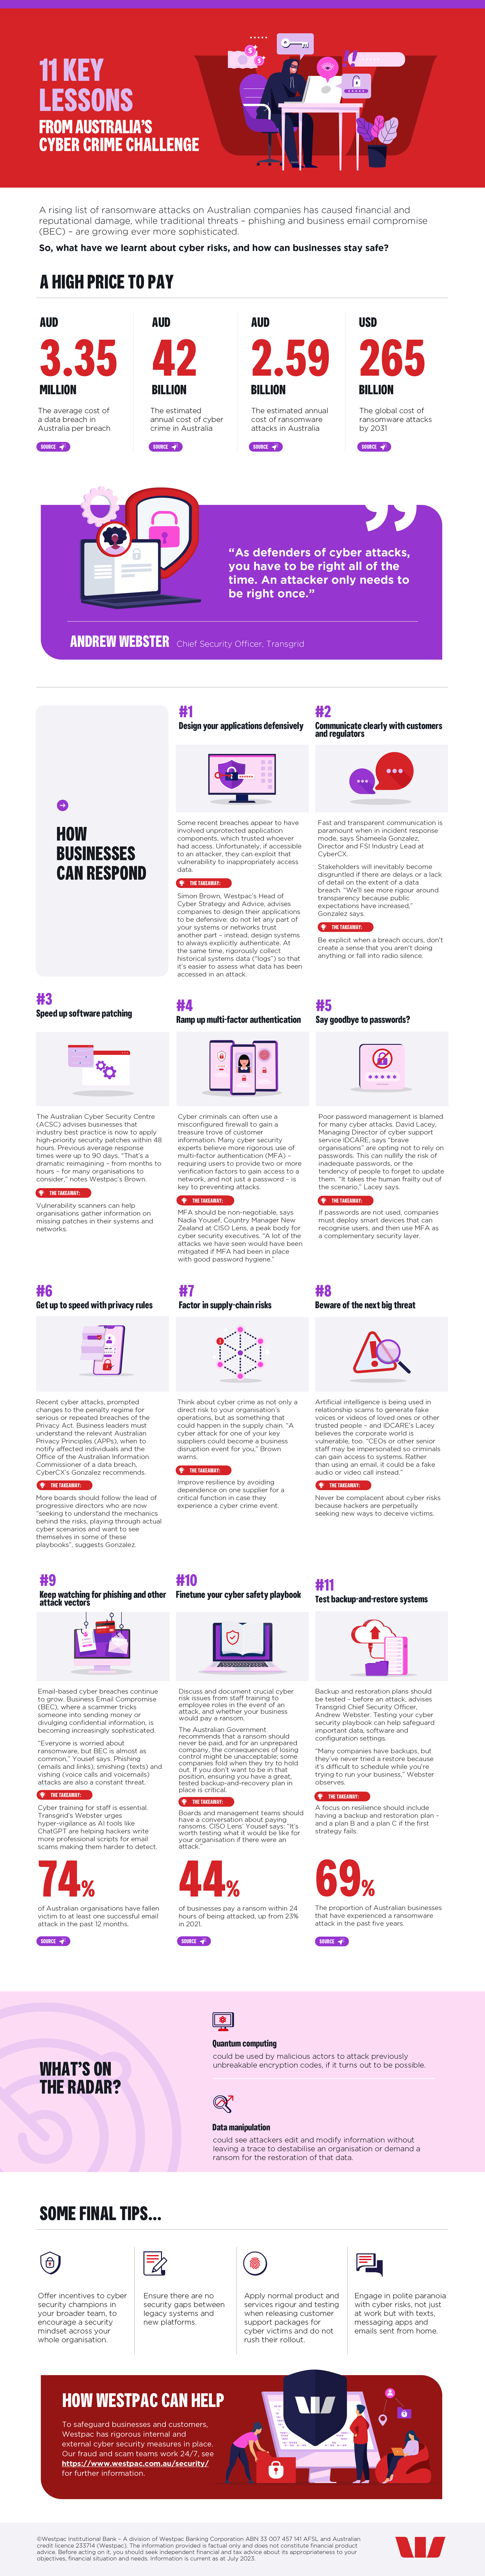 11 lessons from Australia's cyber crime challenge infographic